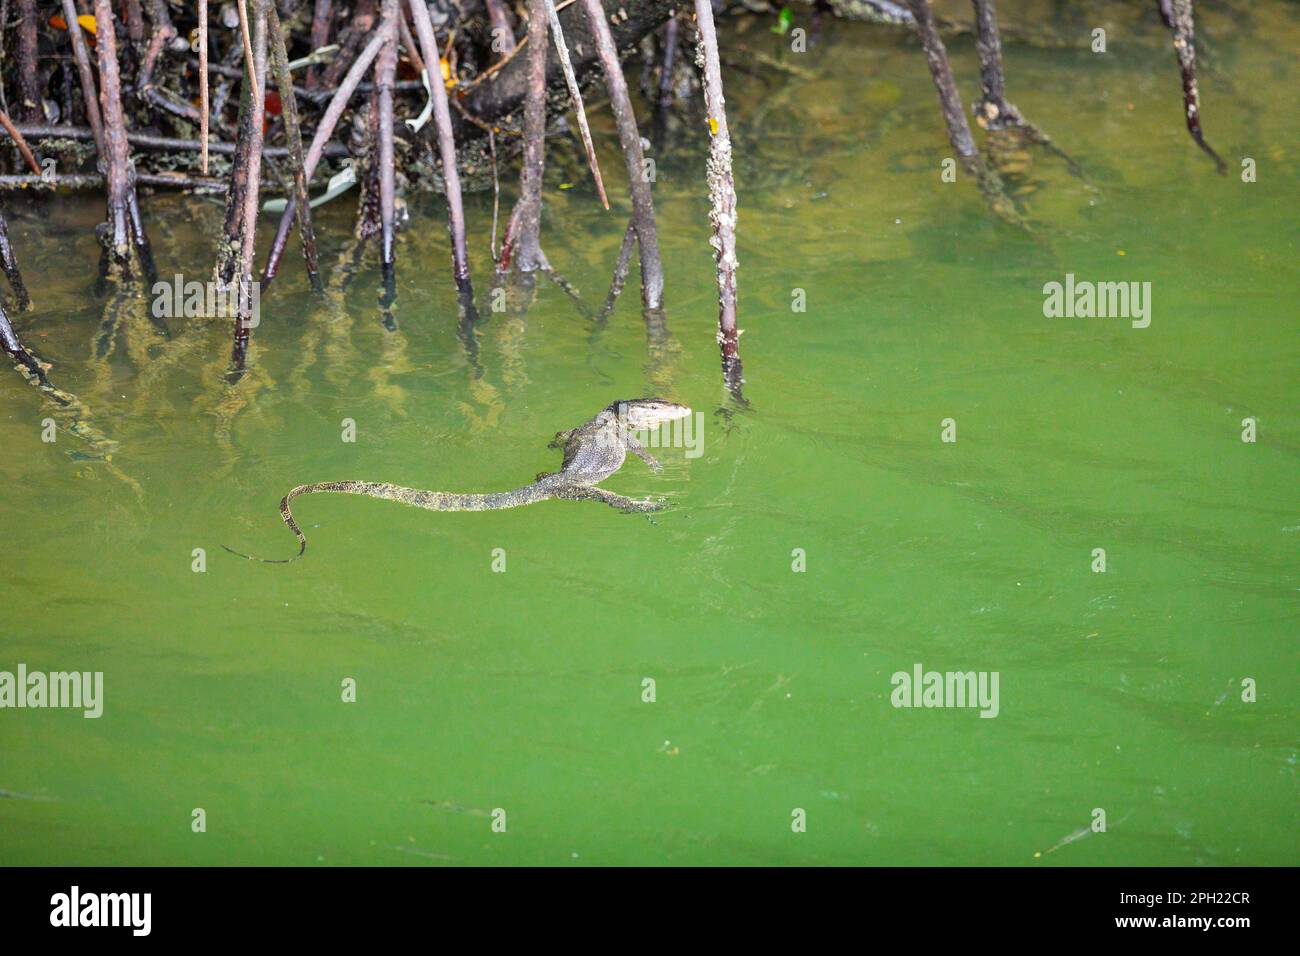 A Malayan water monitor lizard swims in the green water between the root system of a mangrove forest remnant in Singapore. Stock Photo